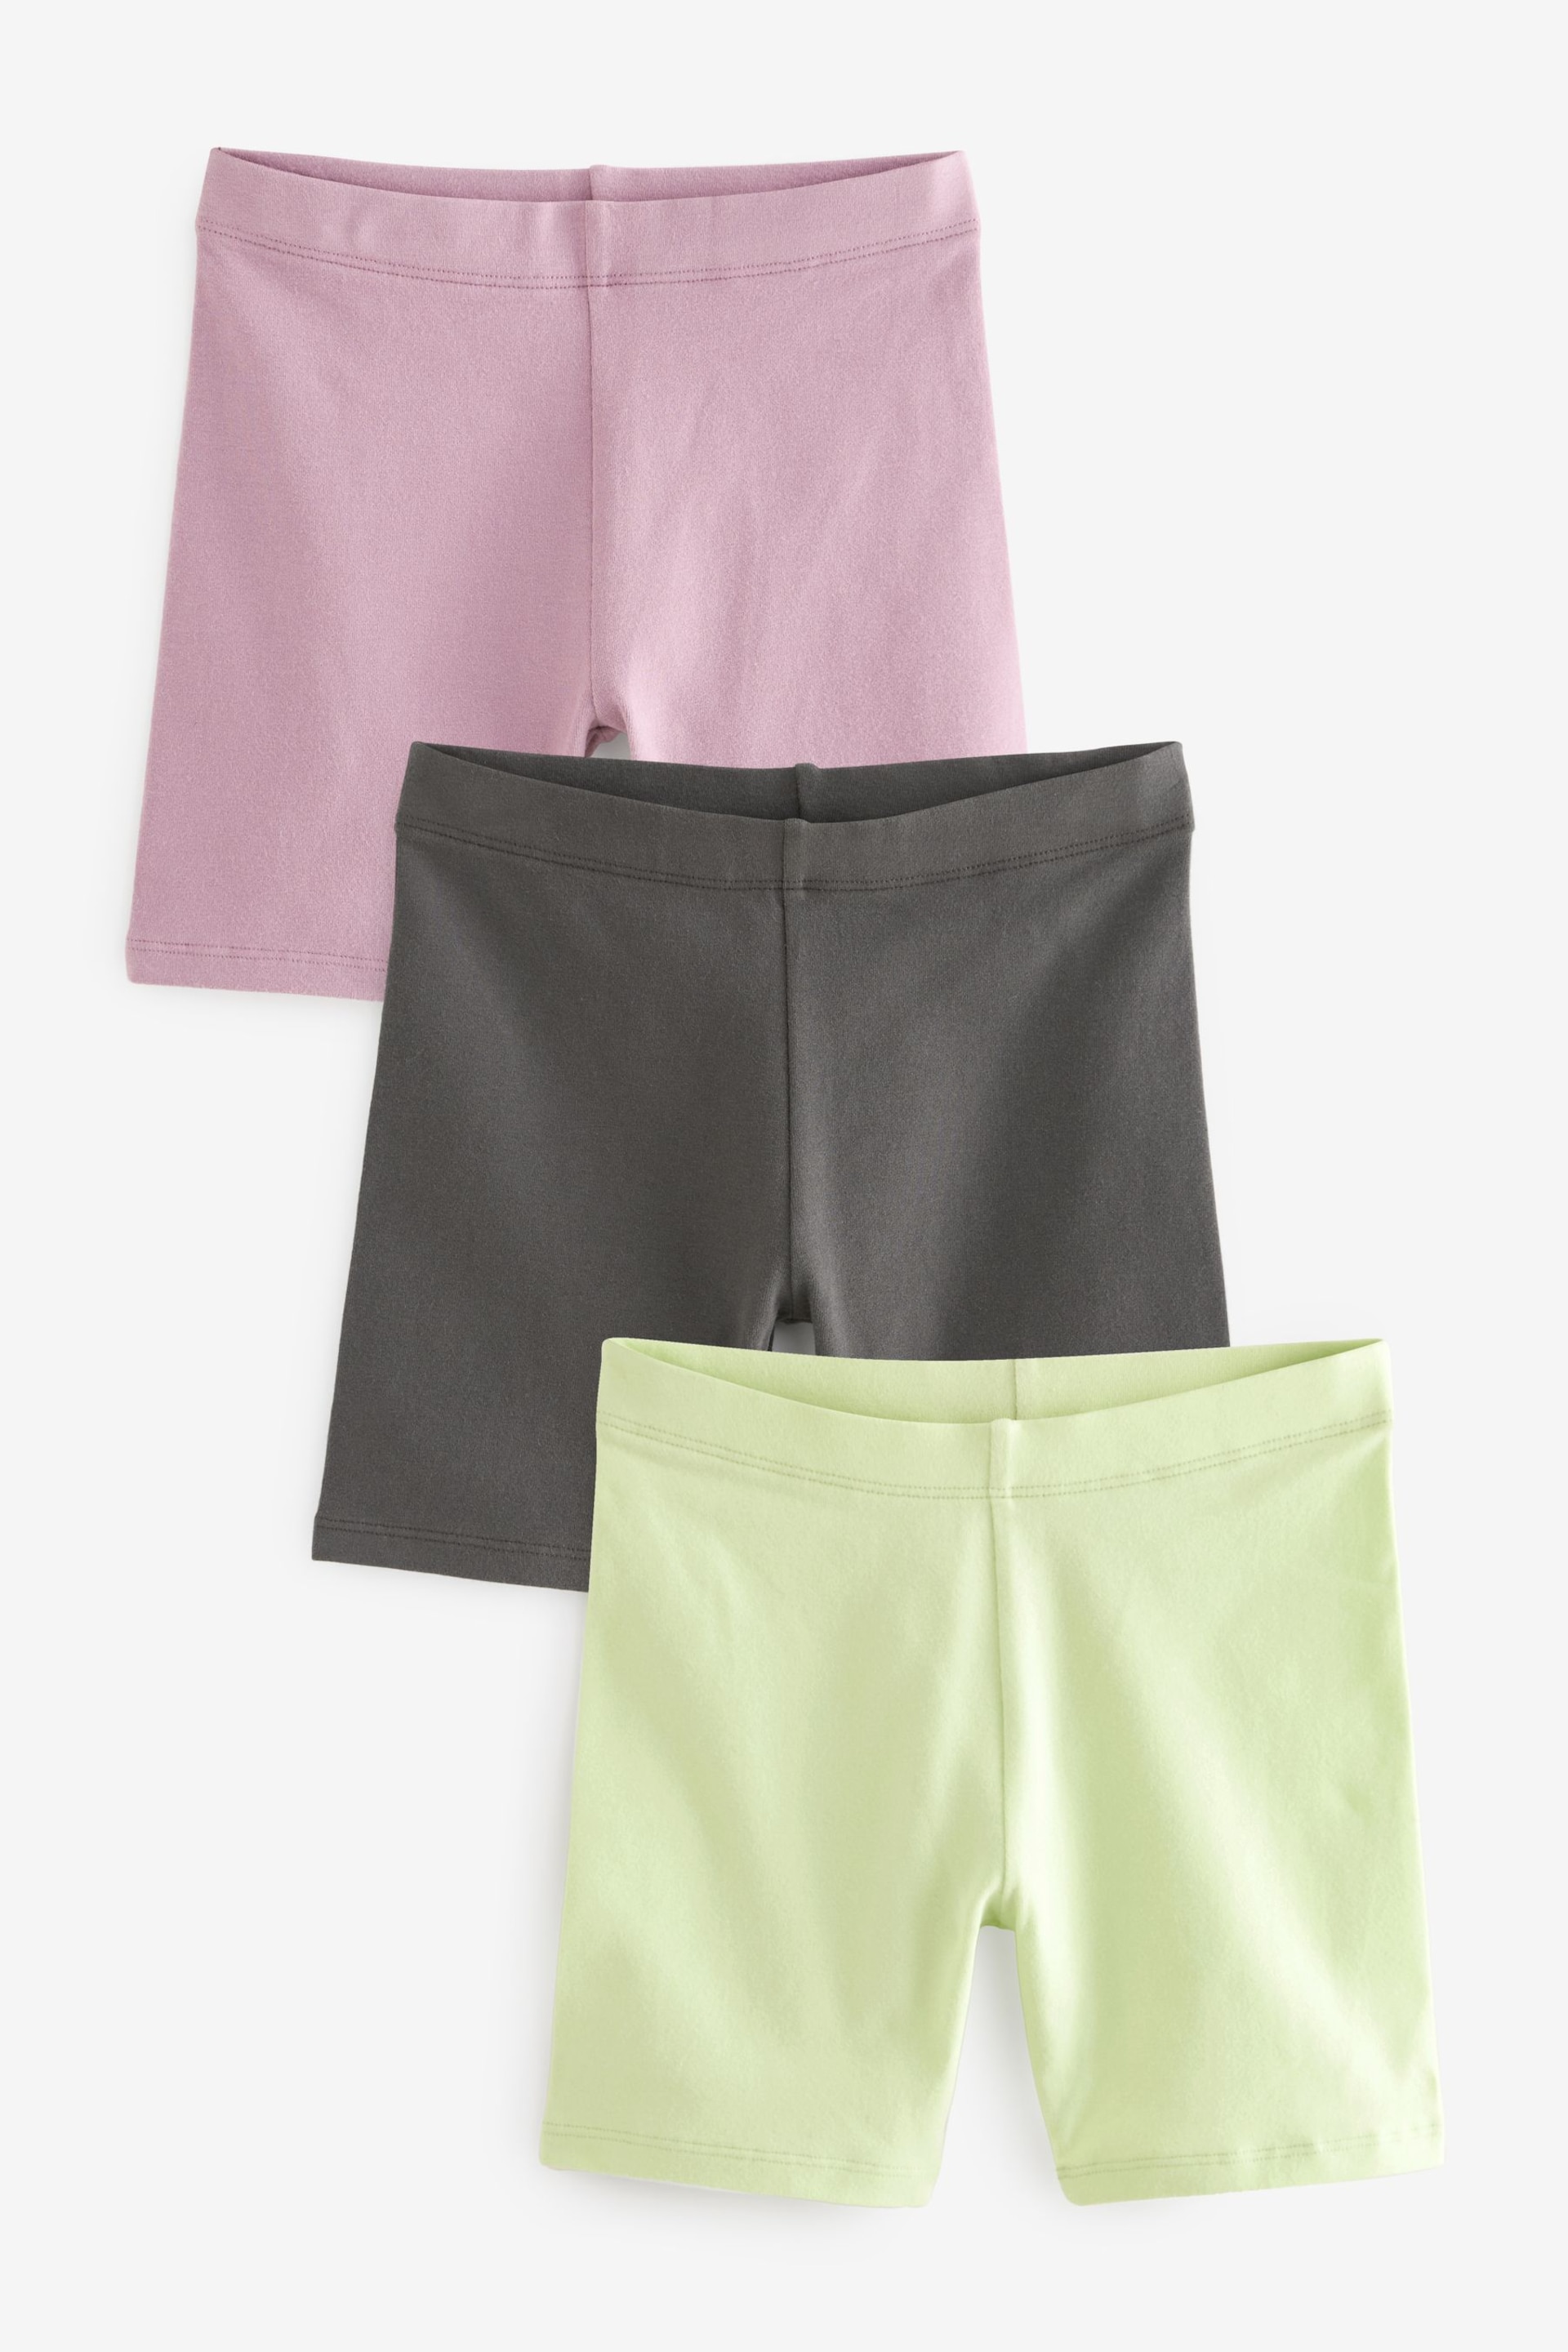 Purple/ Lime Green/ Charcoal Cycle Shorts 3 Pack (3-16yrs) - Image 1 of 5